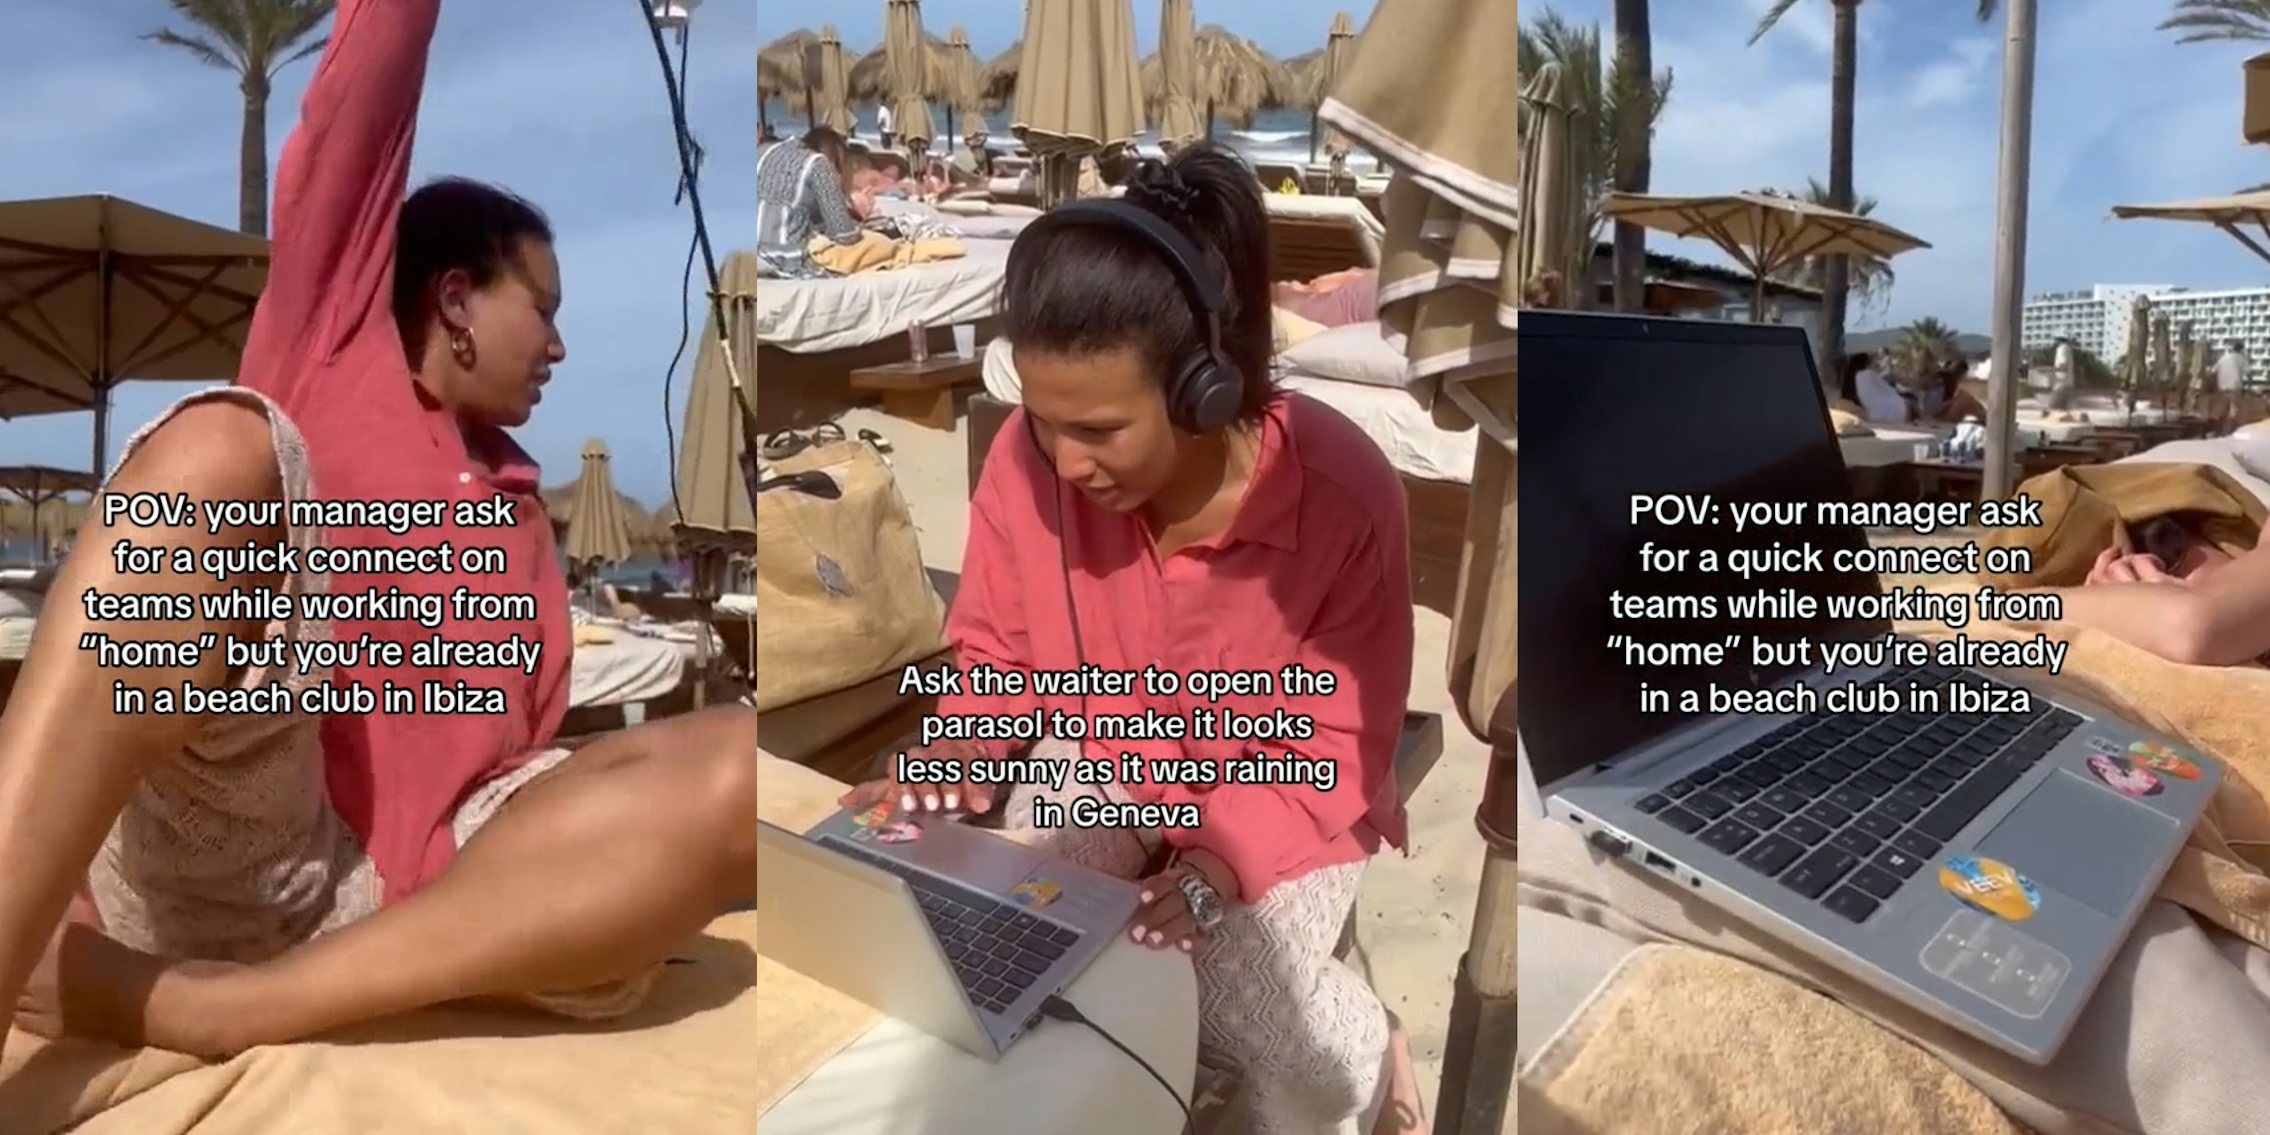 worker at beach with caption 'POV: your manager ask for a quick connect on teams while working from 'home' but you're already in a beach in Ibiza' (l) worker at beach with caption 'Ask the waiter to open the parasol to make it looks less sunny as it was raining in Geneva' (c) worker laptop at beach with caption 'POV: your manager ask for a quick connect on teams while working from 'home' but you're already in a beach in Ibiza' (r)